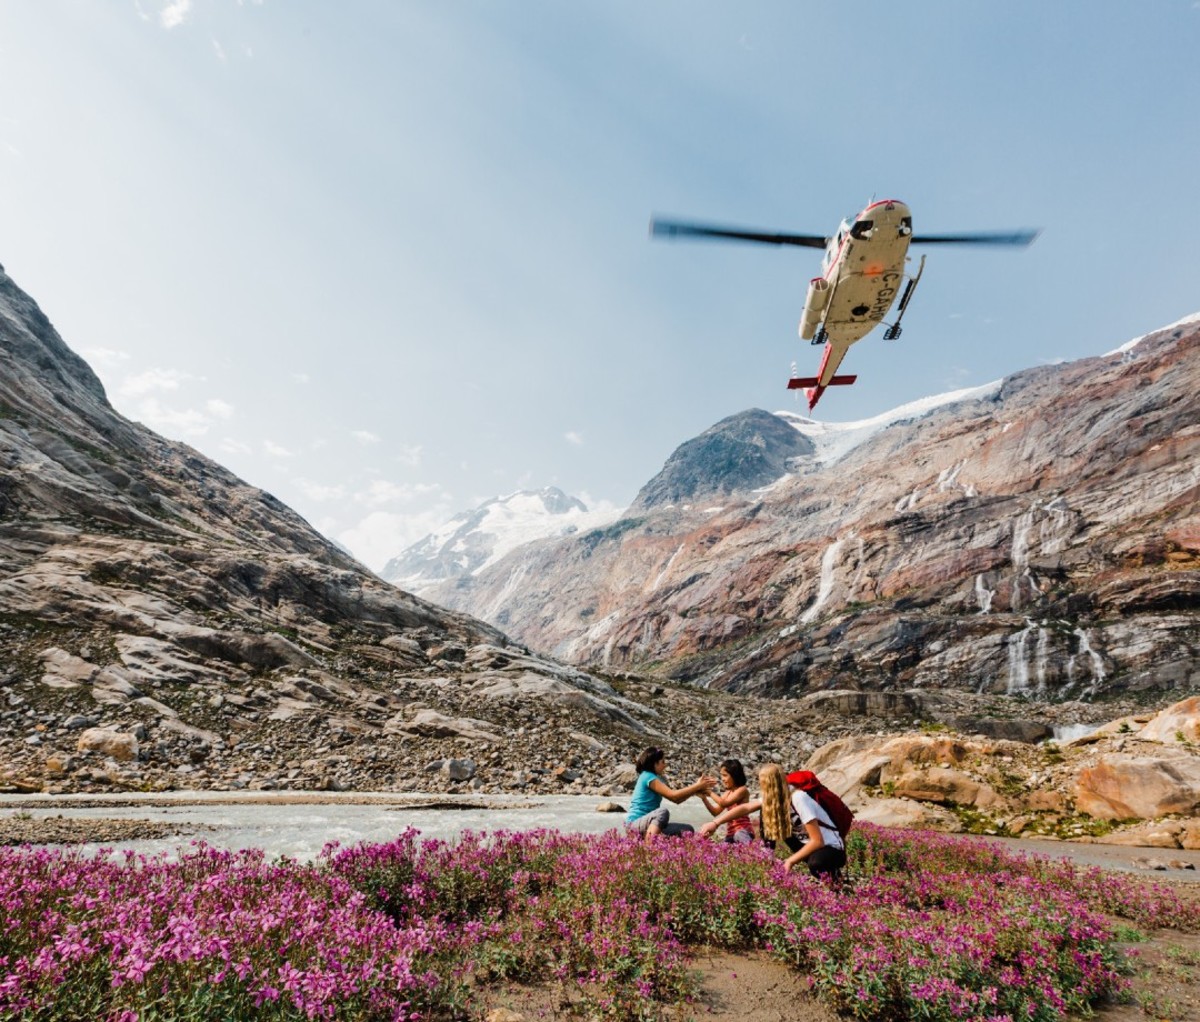 Helicopter flies over hikers at a remote mountain lake with pink wildflowers